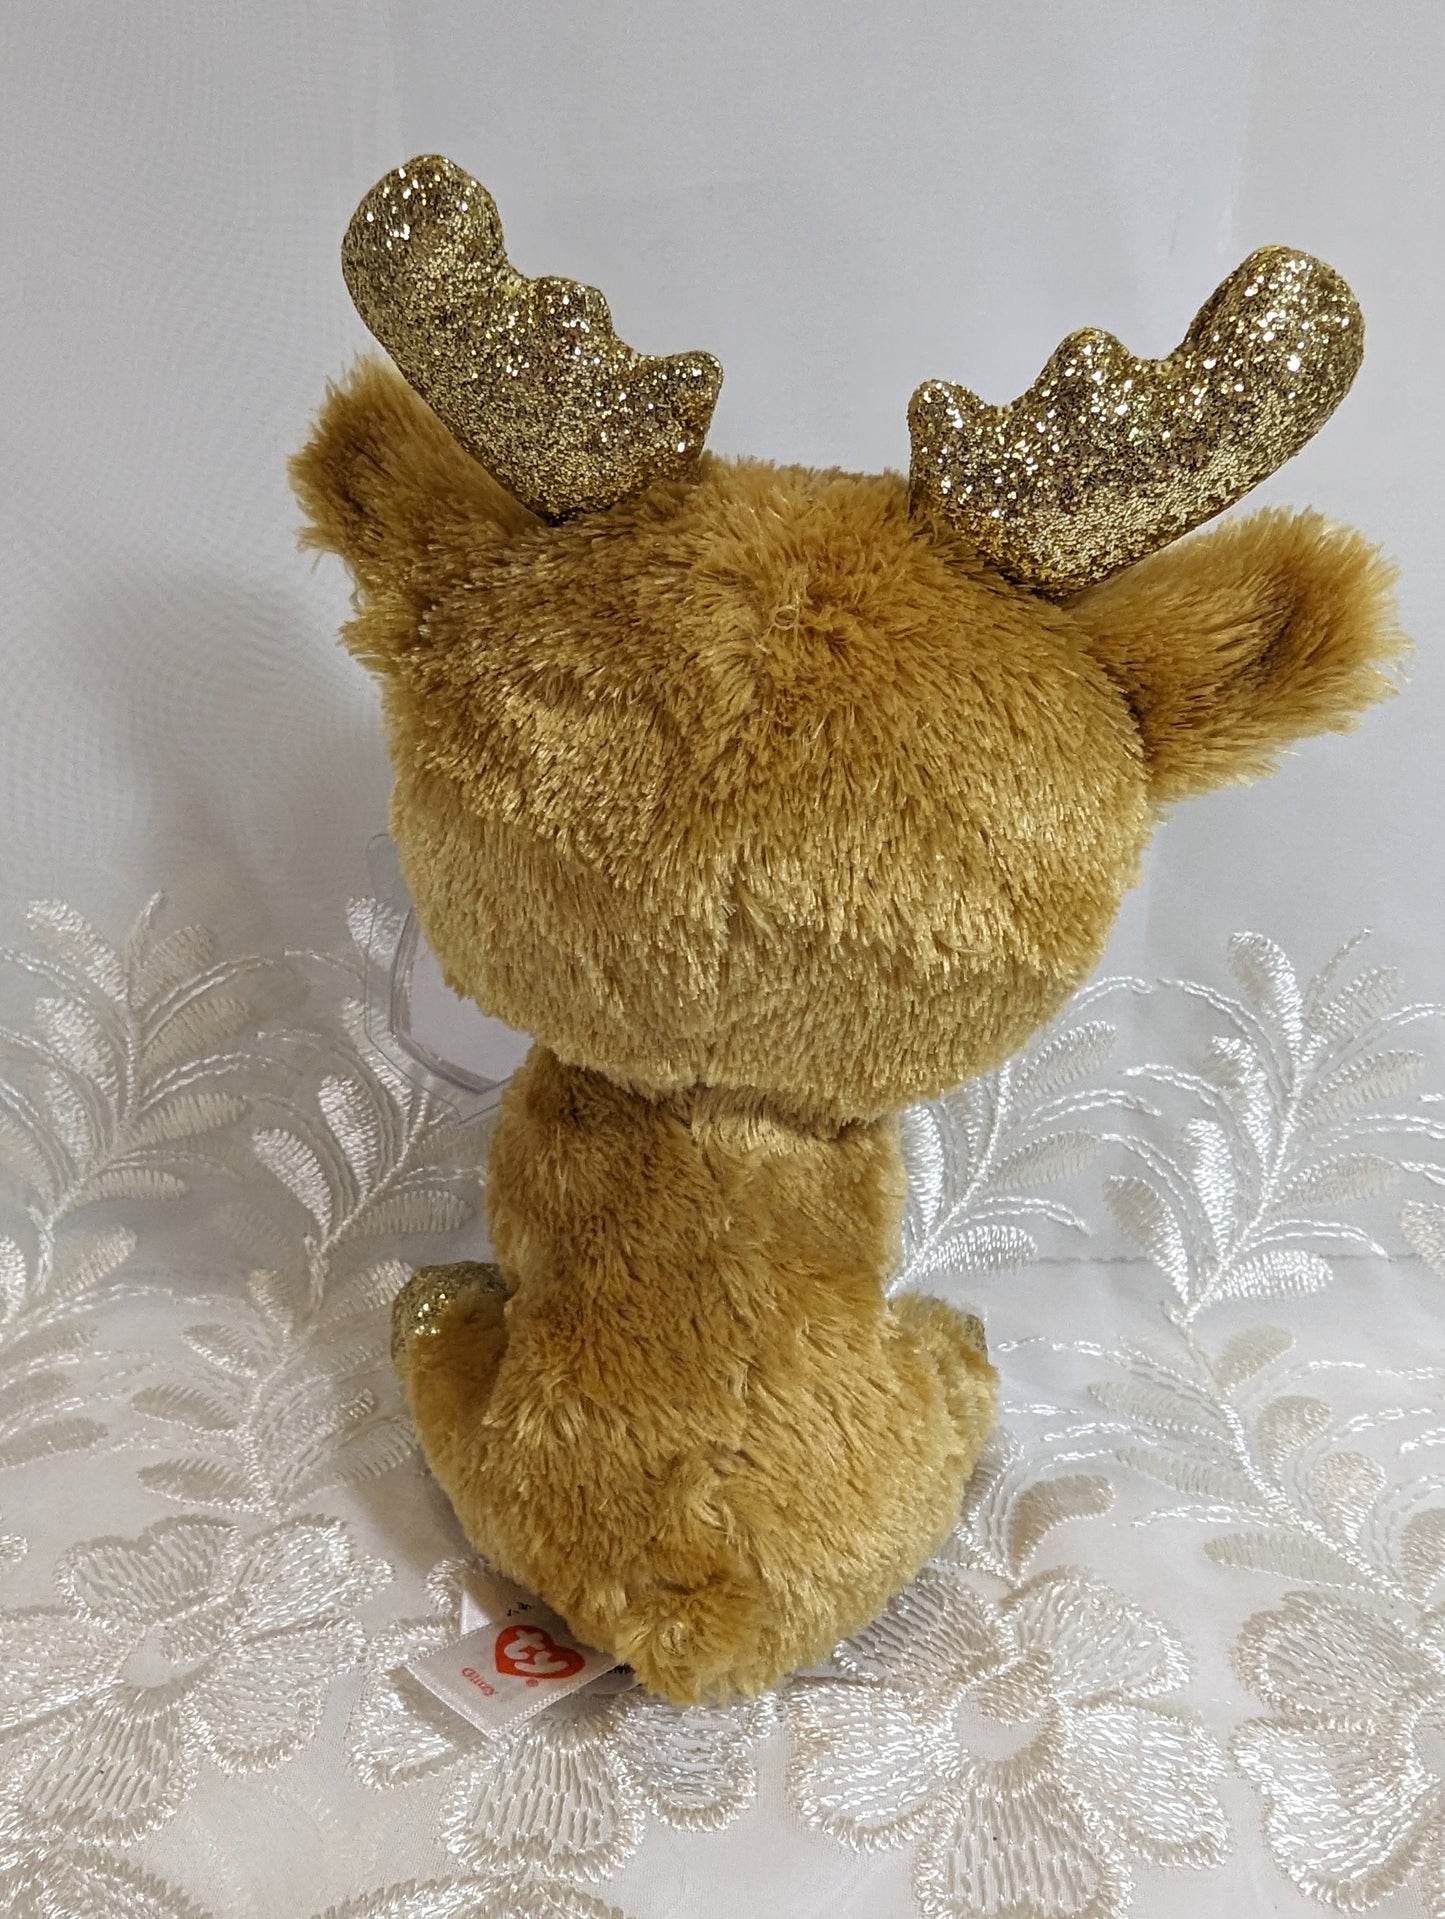 Ty Beanie Boo - Glitzy The Gold Reindeer (6 in) - Vintage Beanies Canada